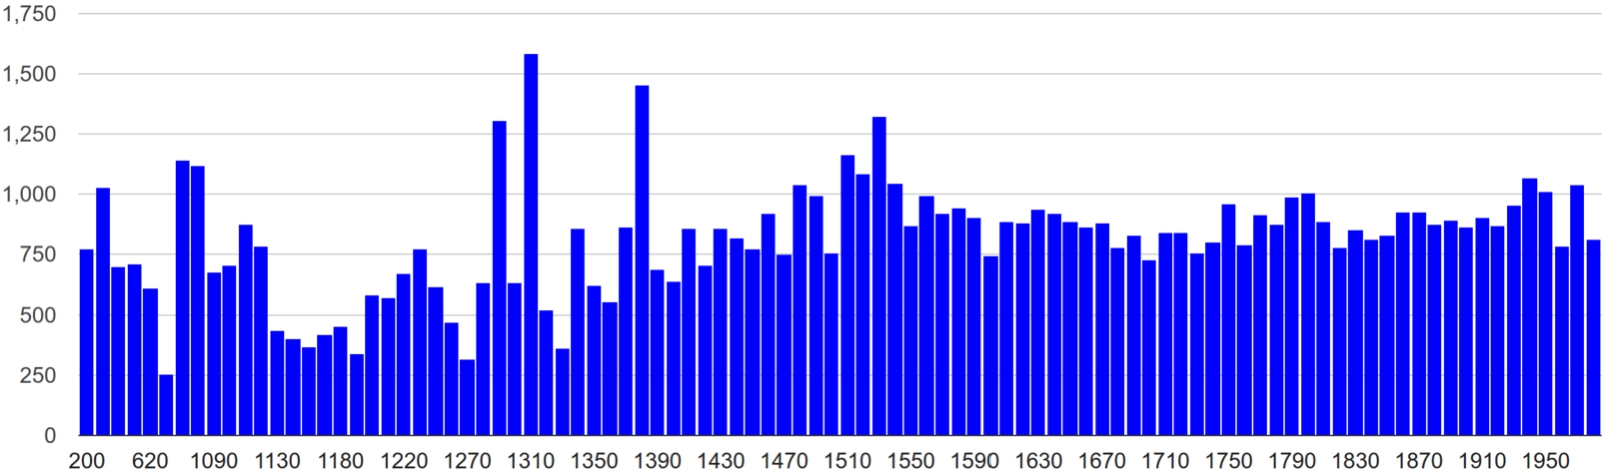 Amount of words in biographies by decade; screenshot from the BiographySampo portal.